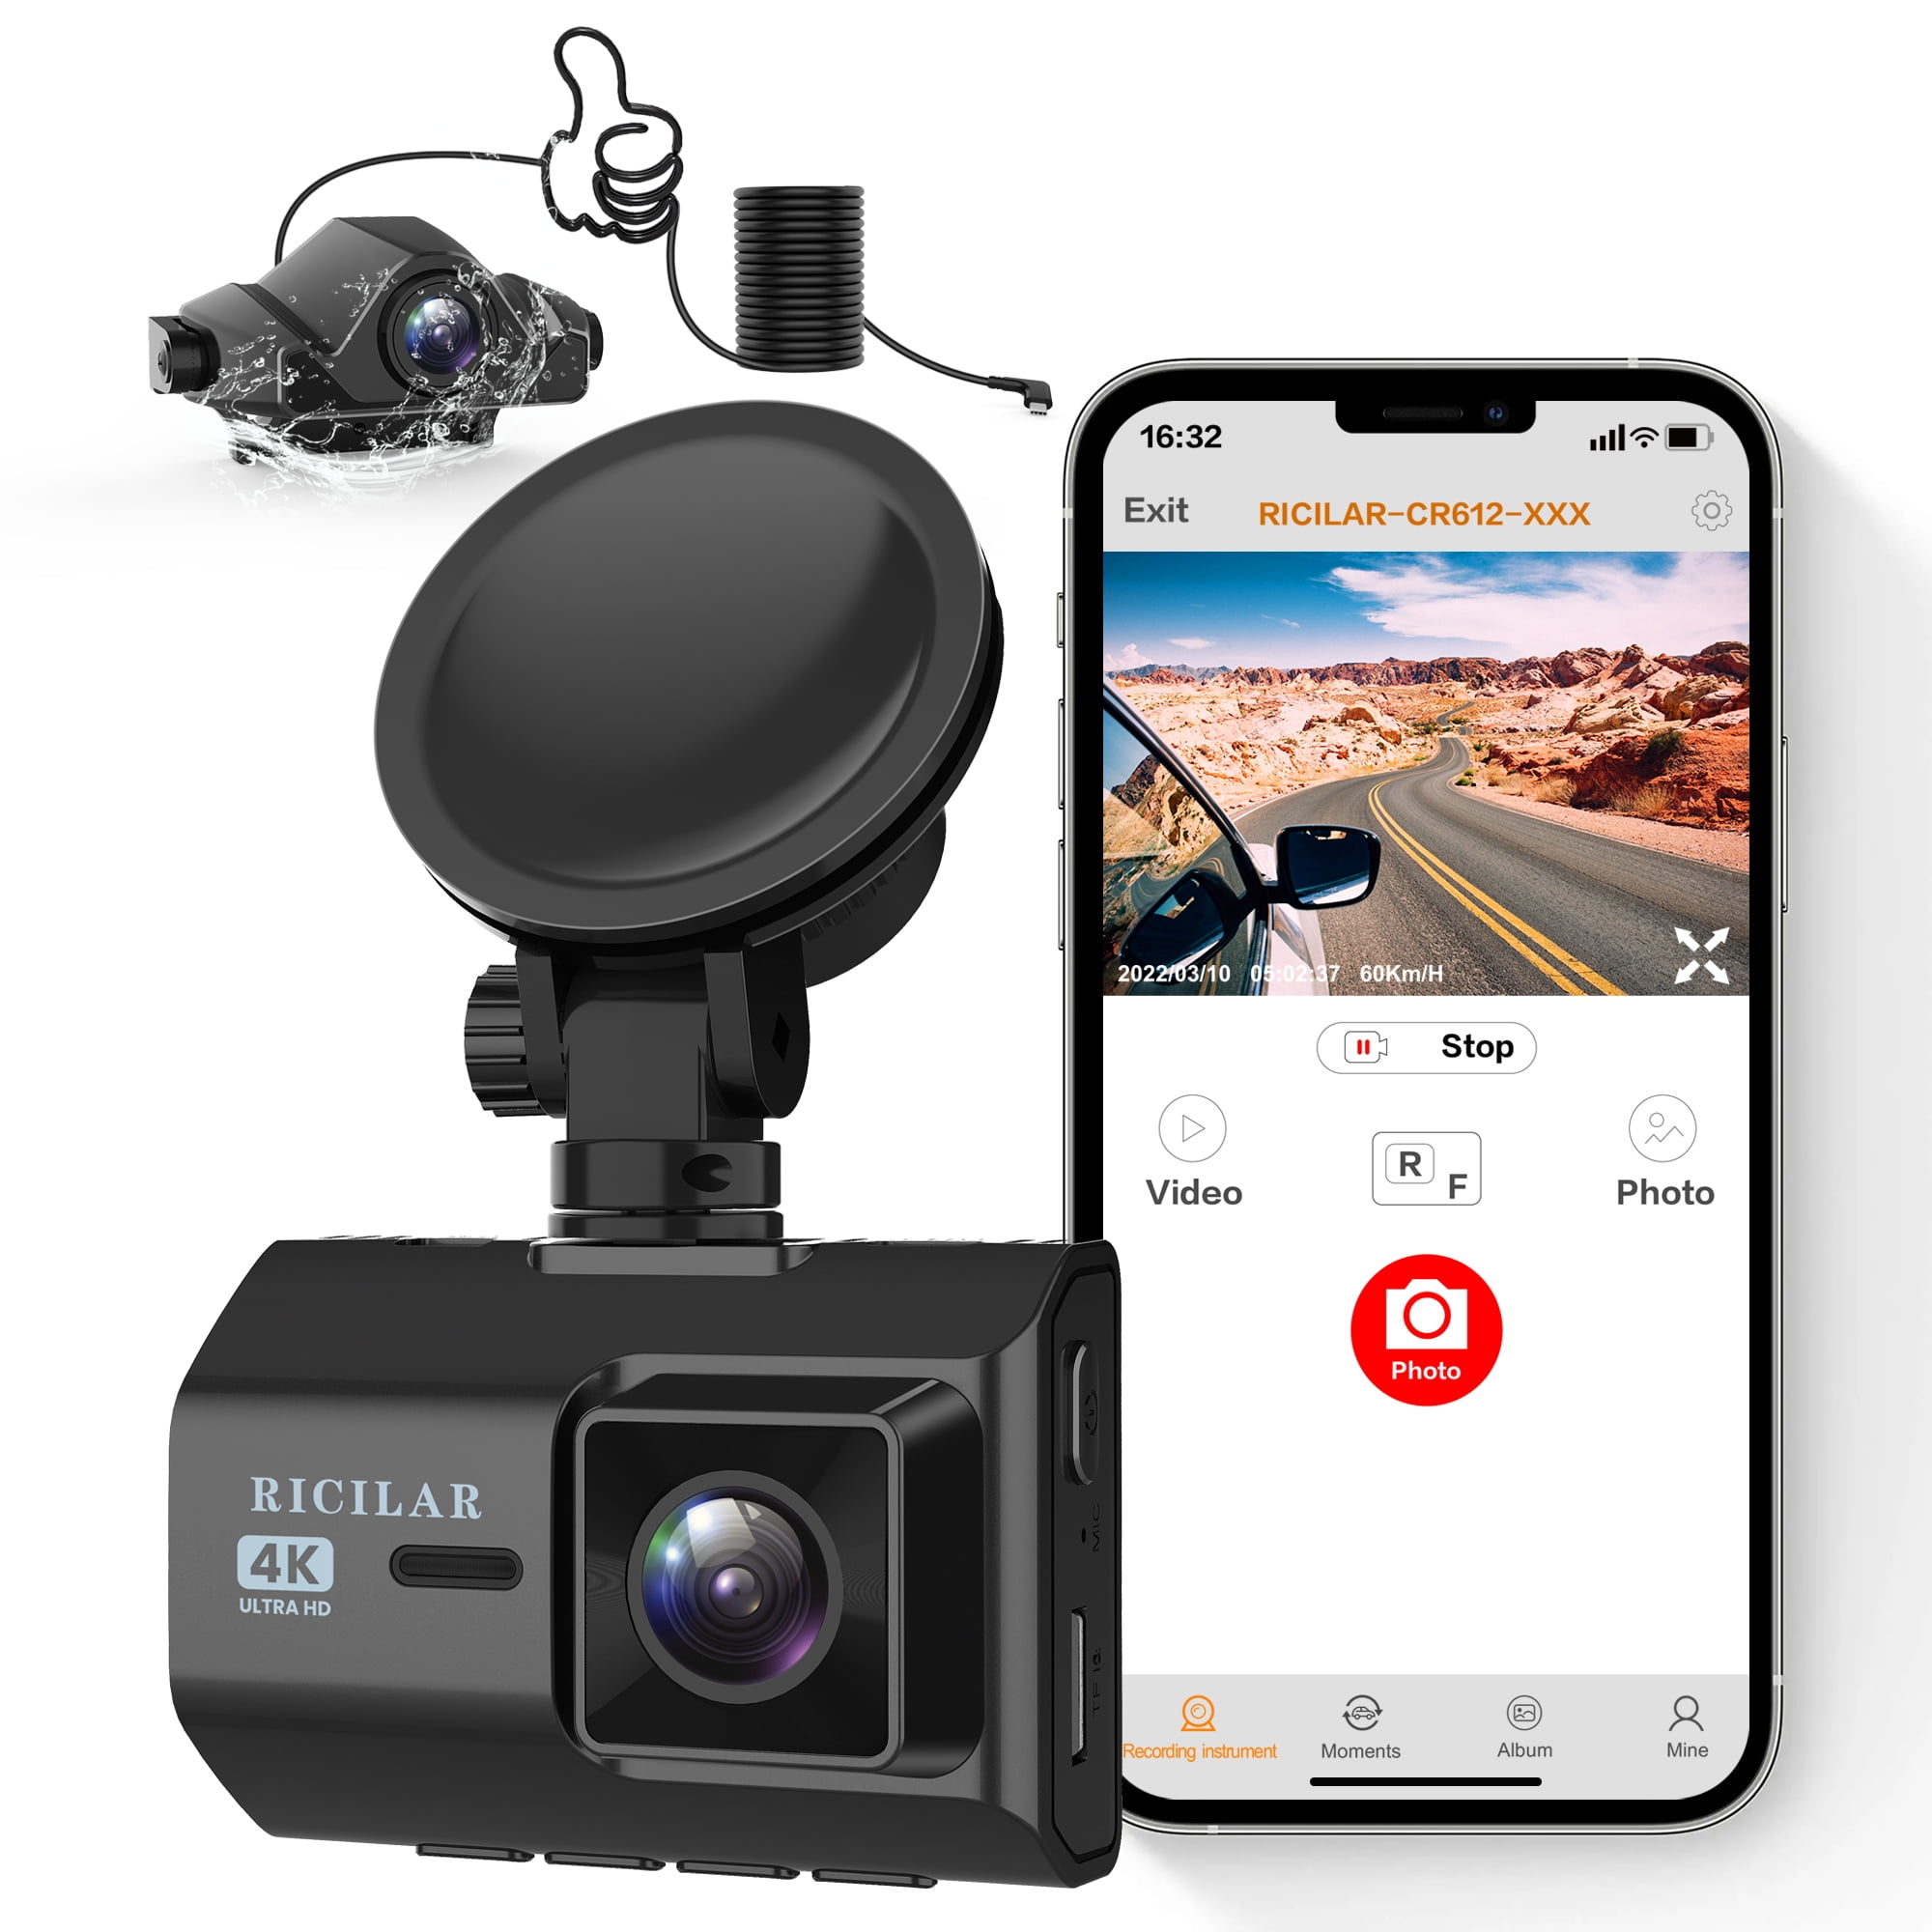 ROVE R2-4K Dash Cam Built-in WiFi GPS Car Dashboard Camera Recorder with  UHD 2160P, 2.4 IPS Screen, 150° Wide Angle, WDR, Night Vision